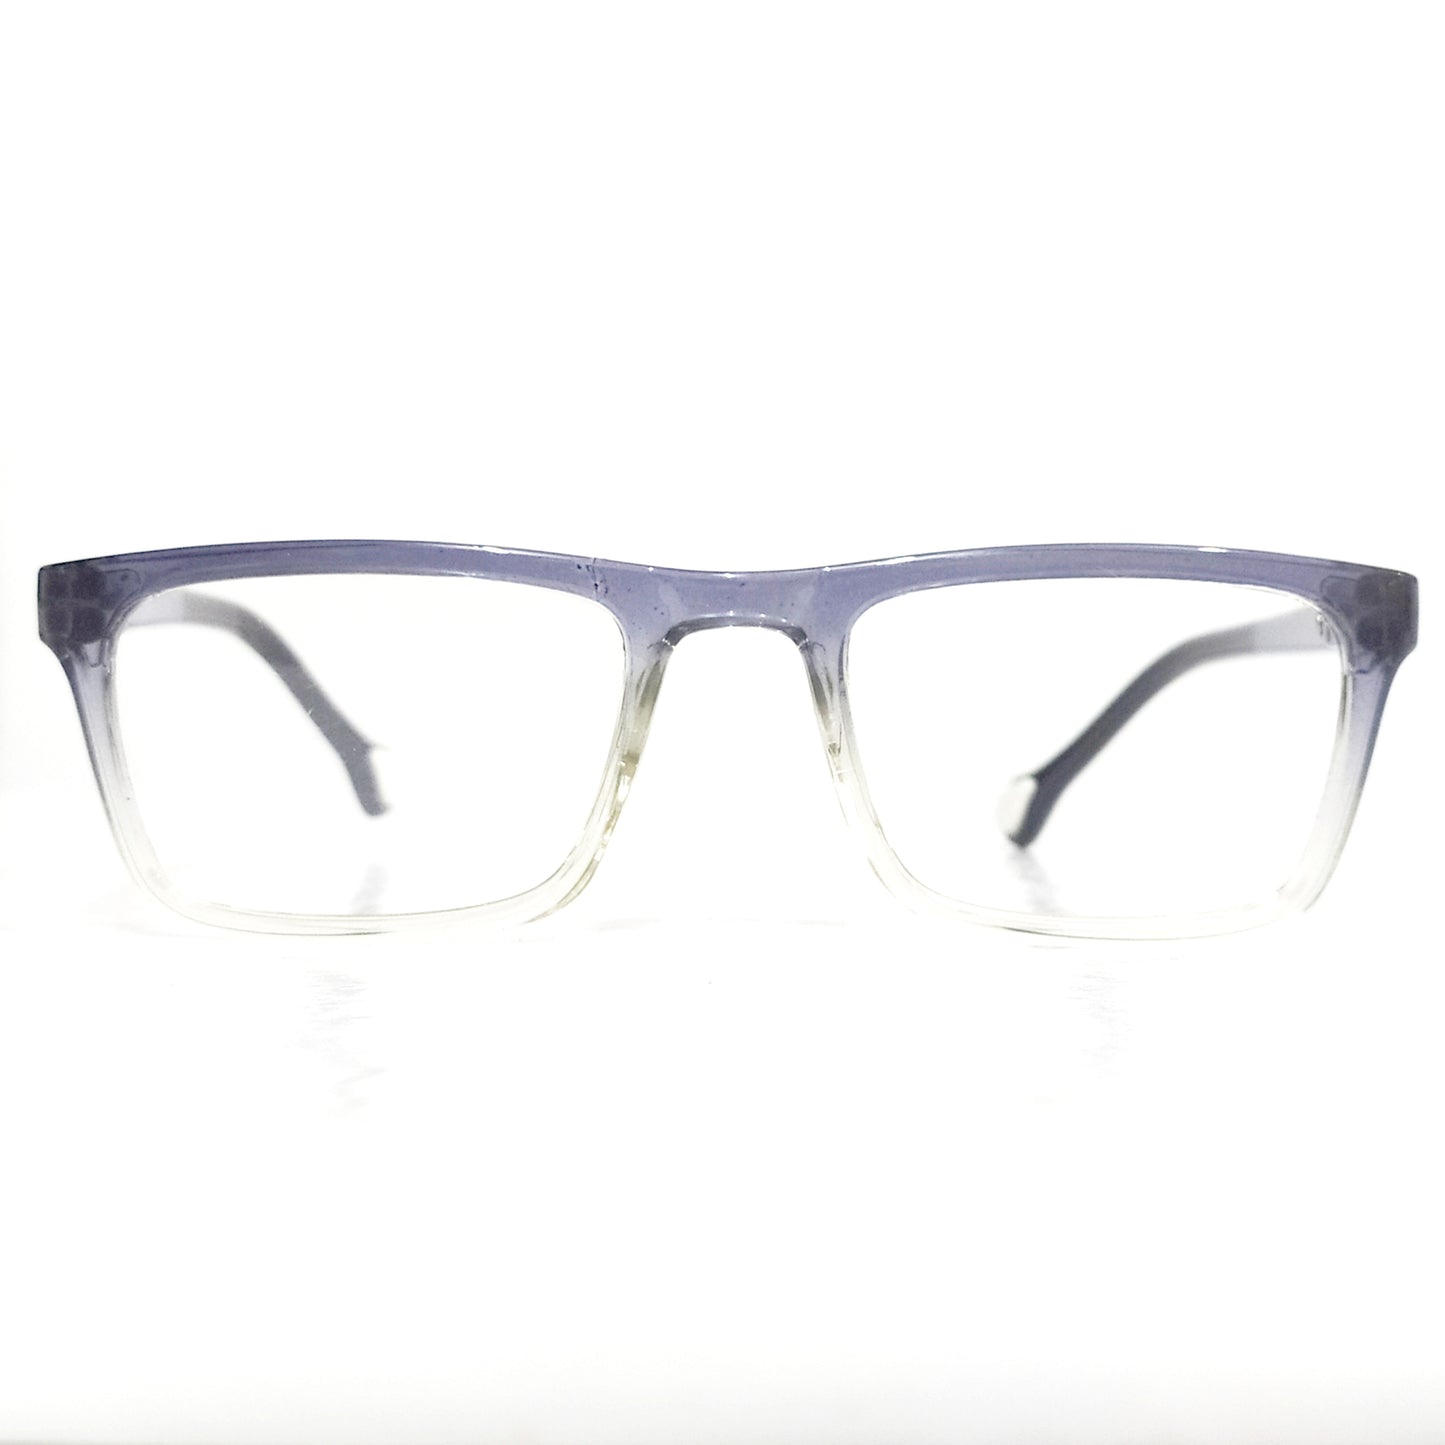 Two Tone Grey Spectacle Frames for Kids 3-5 Years Old